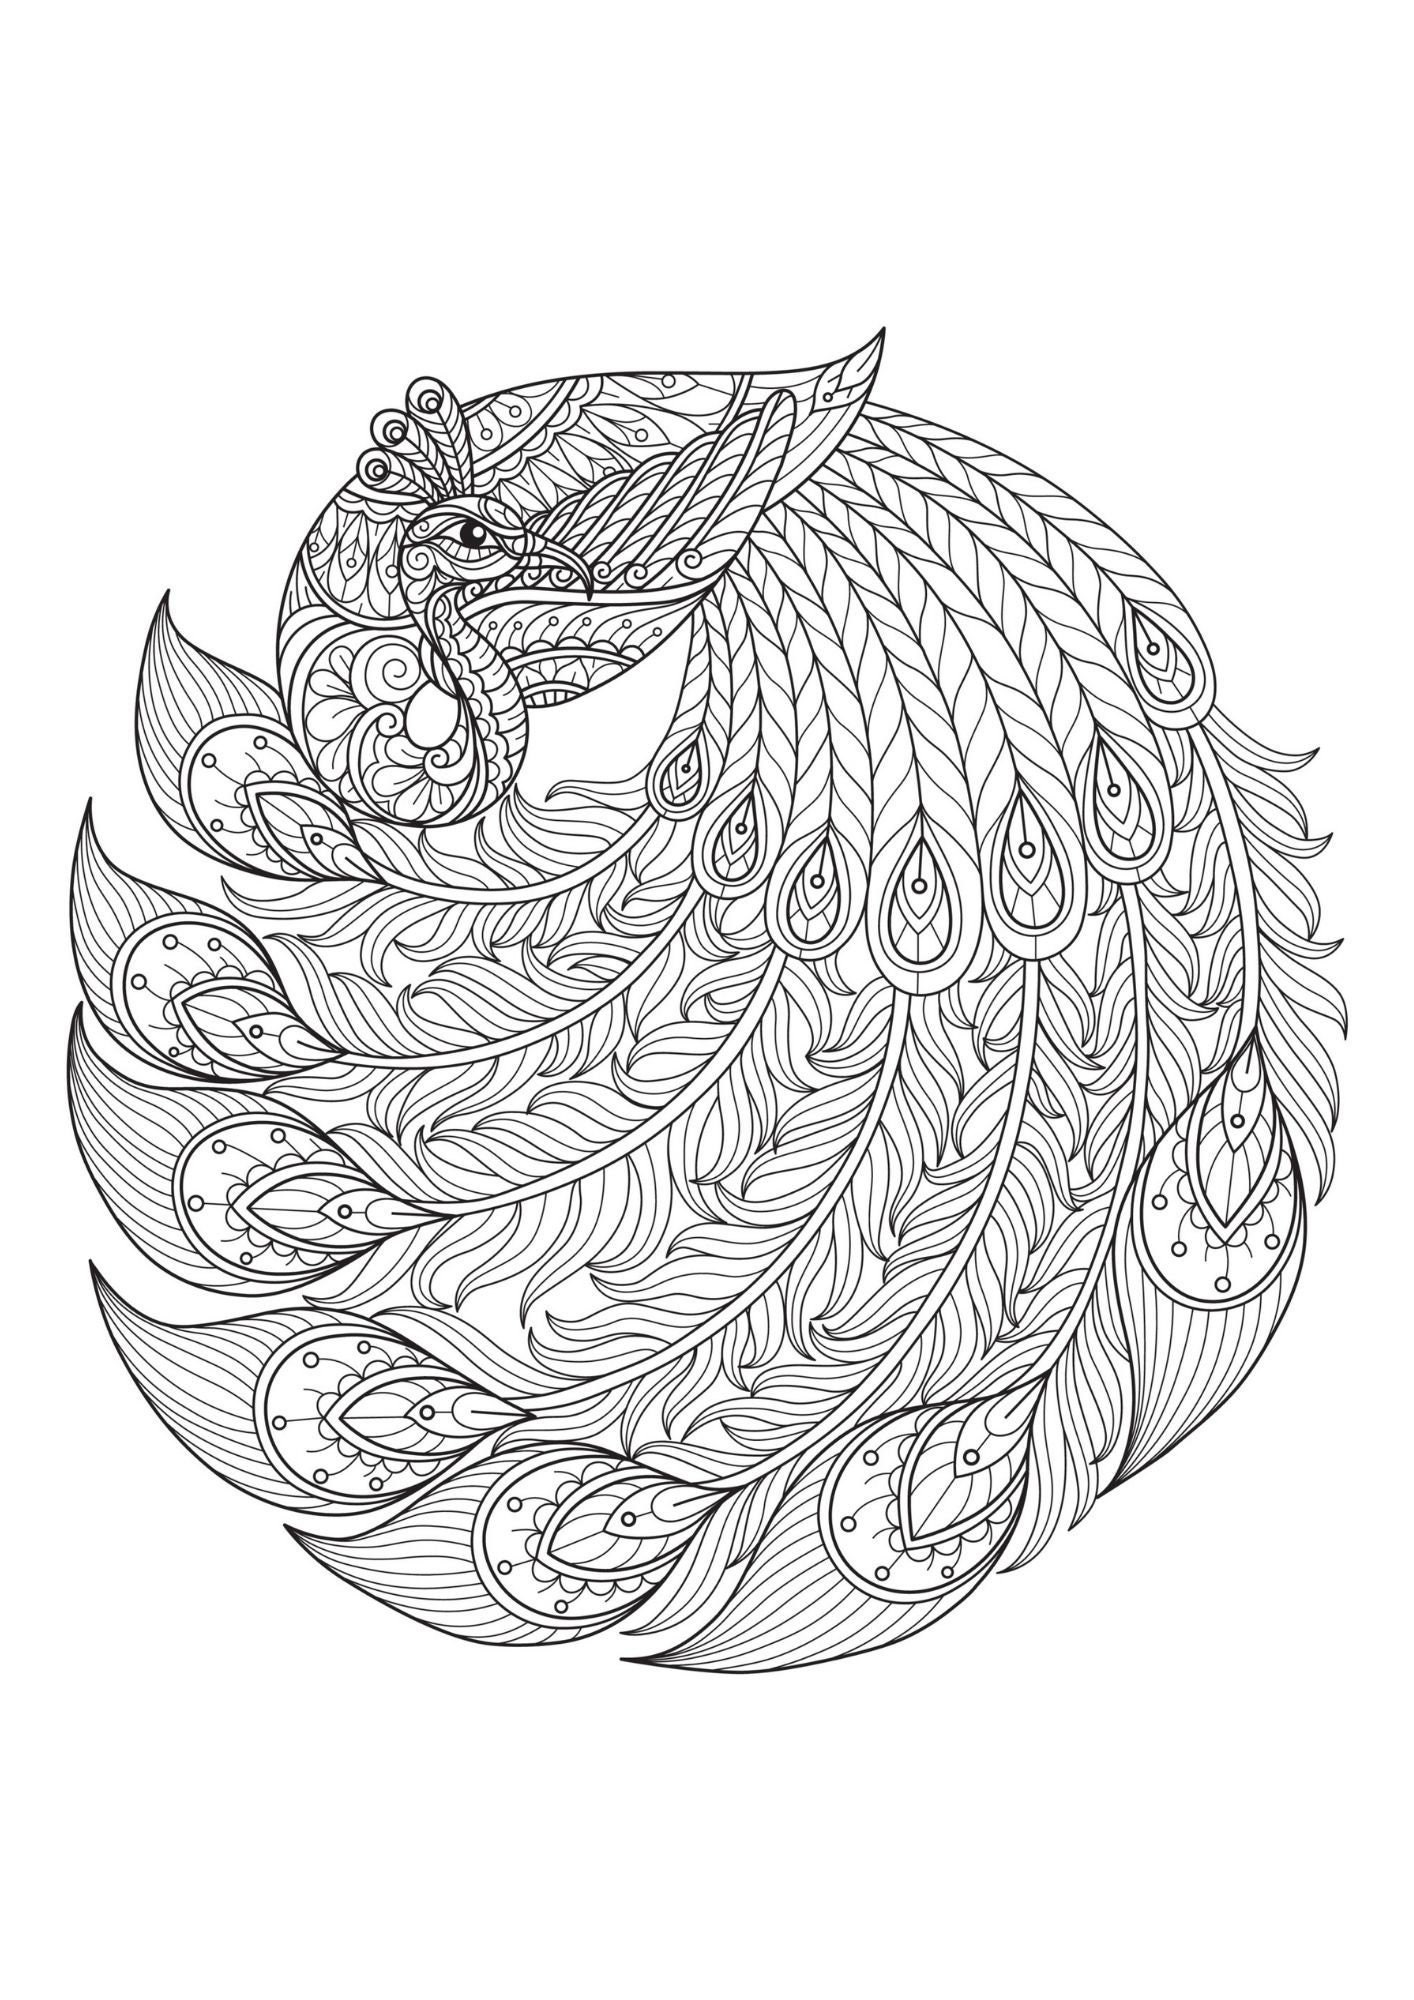 Mandala animal and insect coloring pages for adult coloring book svg